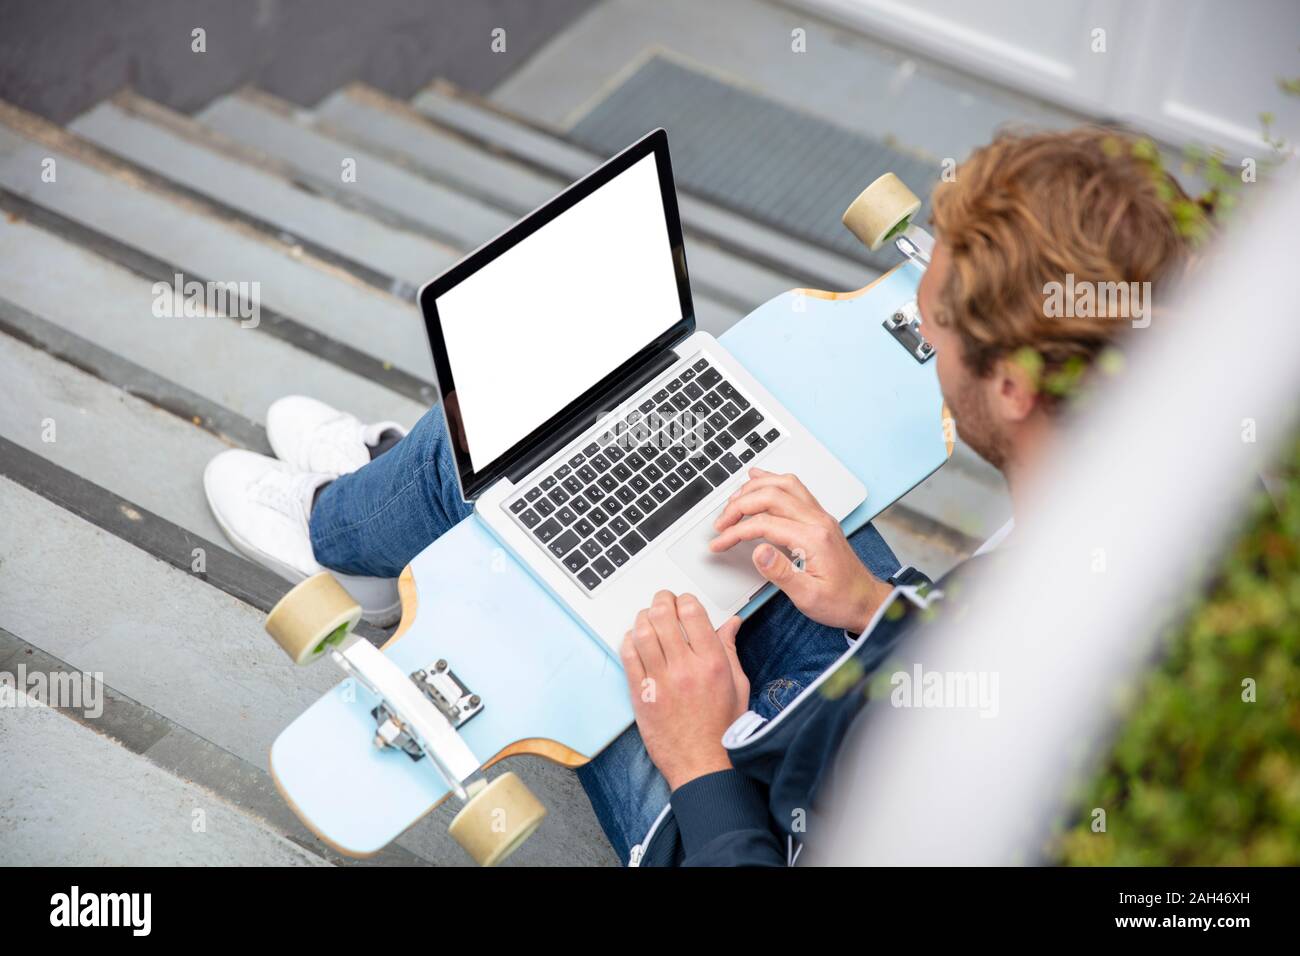 Young man sitting on steps, using laptop on longboard Stock Photo